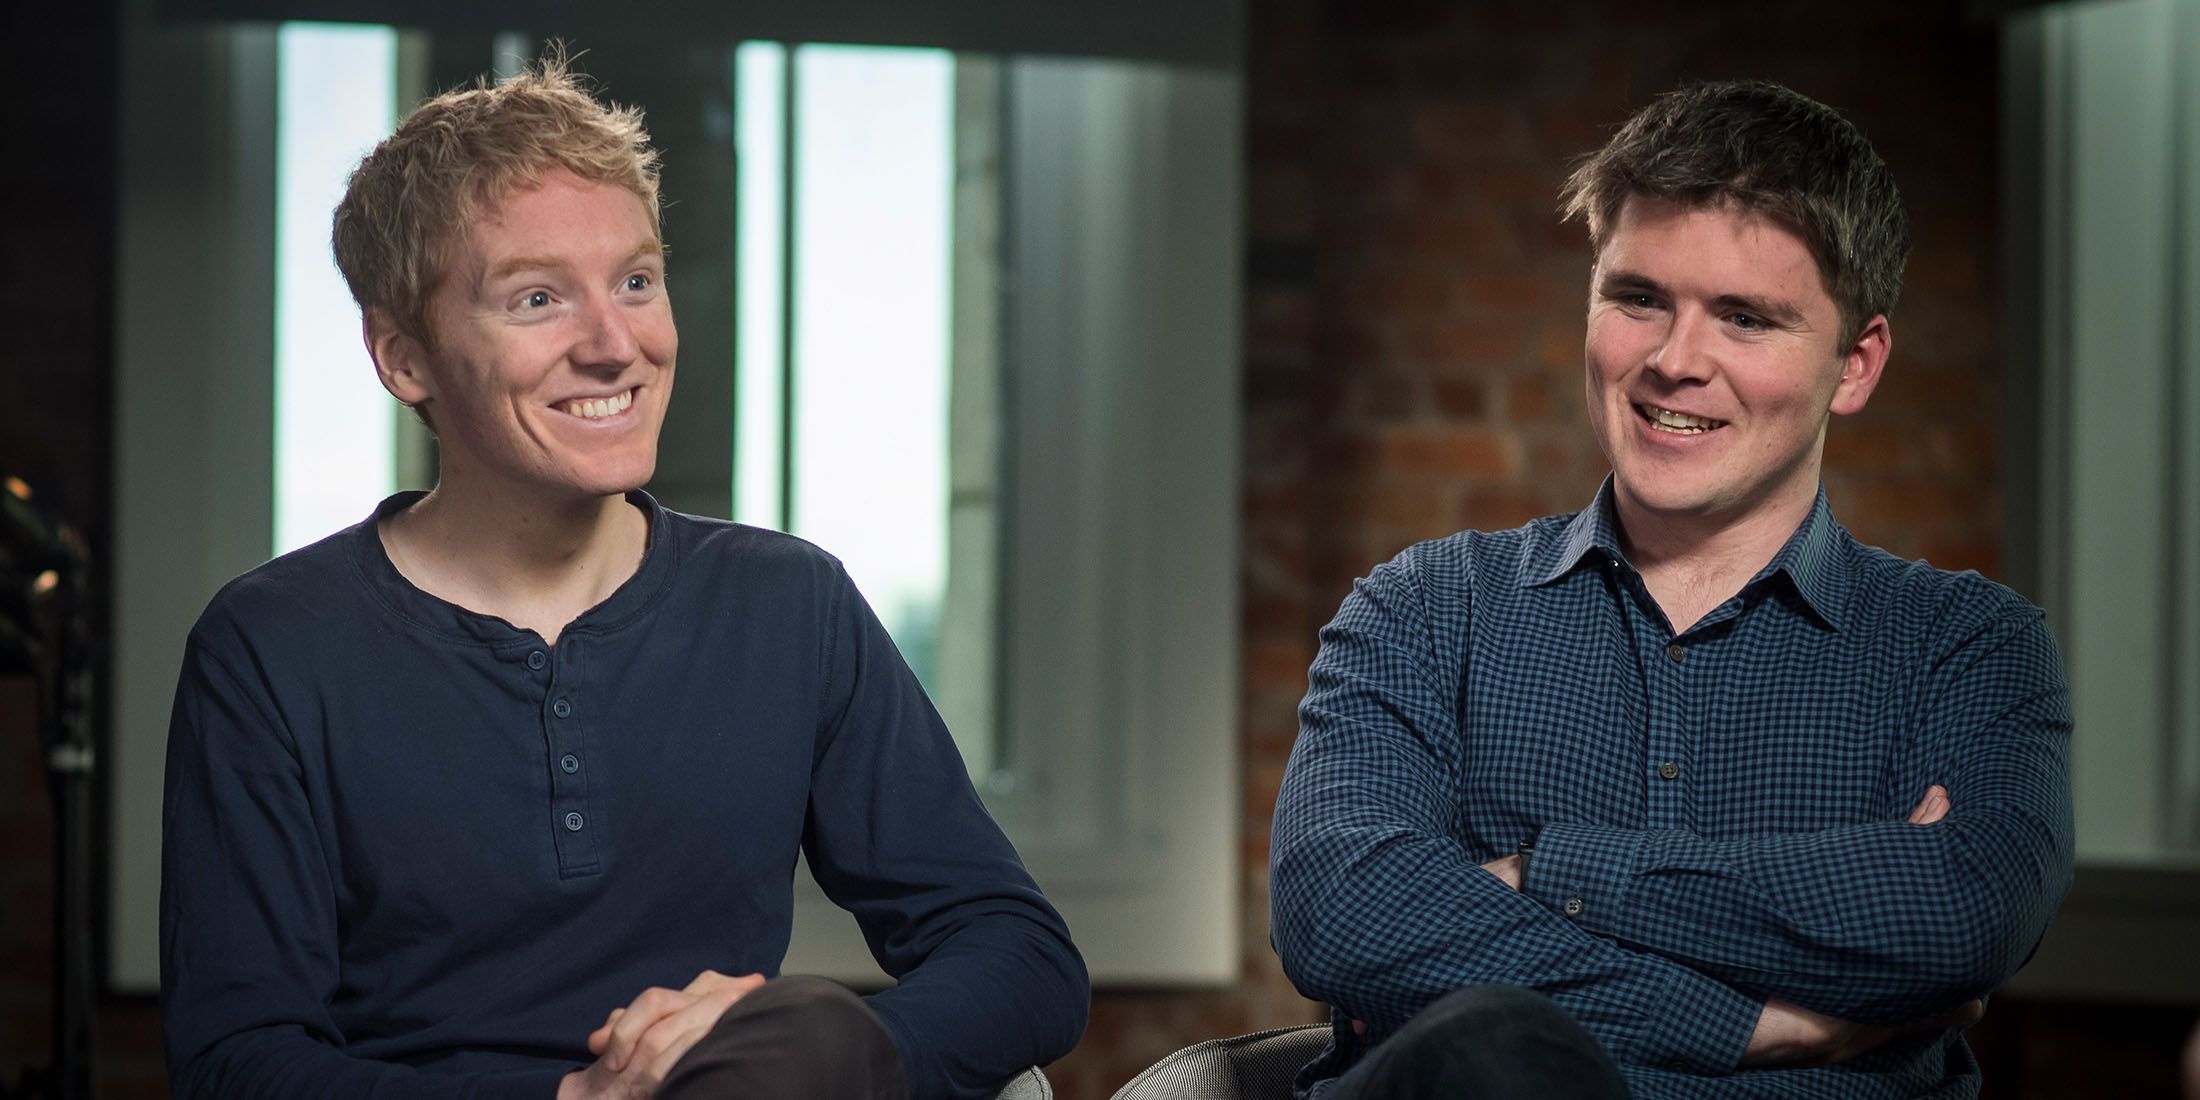 Patrick Collison, Stripe CEO and co-founder (right) and John Collison, Stripe president and co-founder (left) Photographer: David Paul Morris/Bloomberg